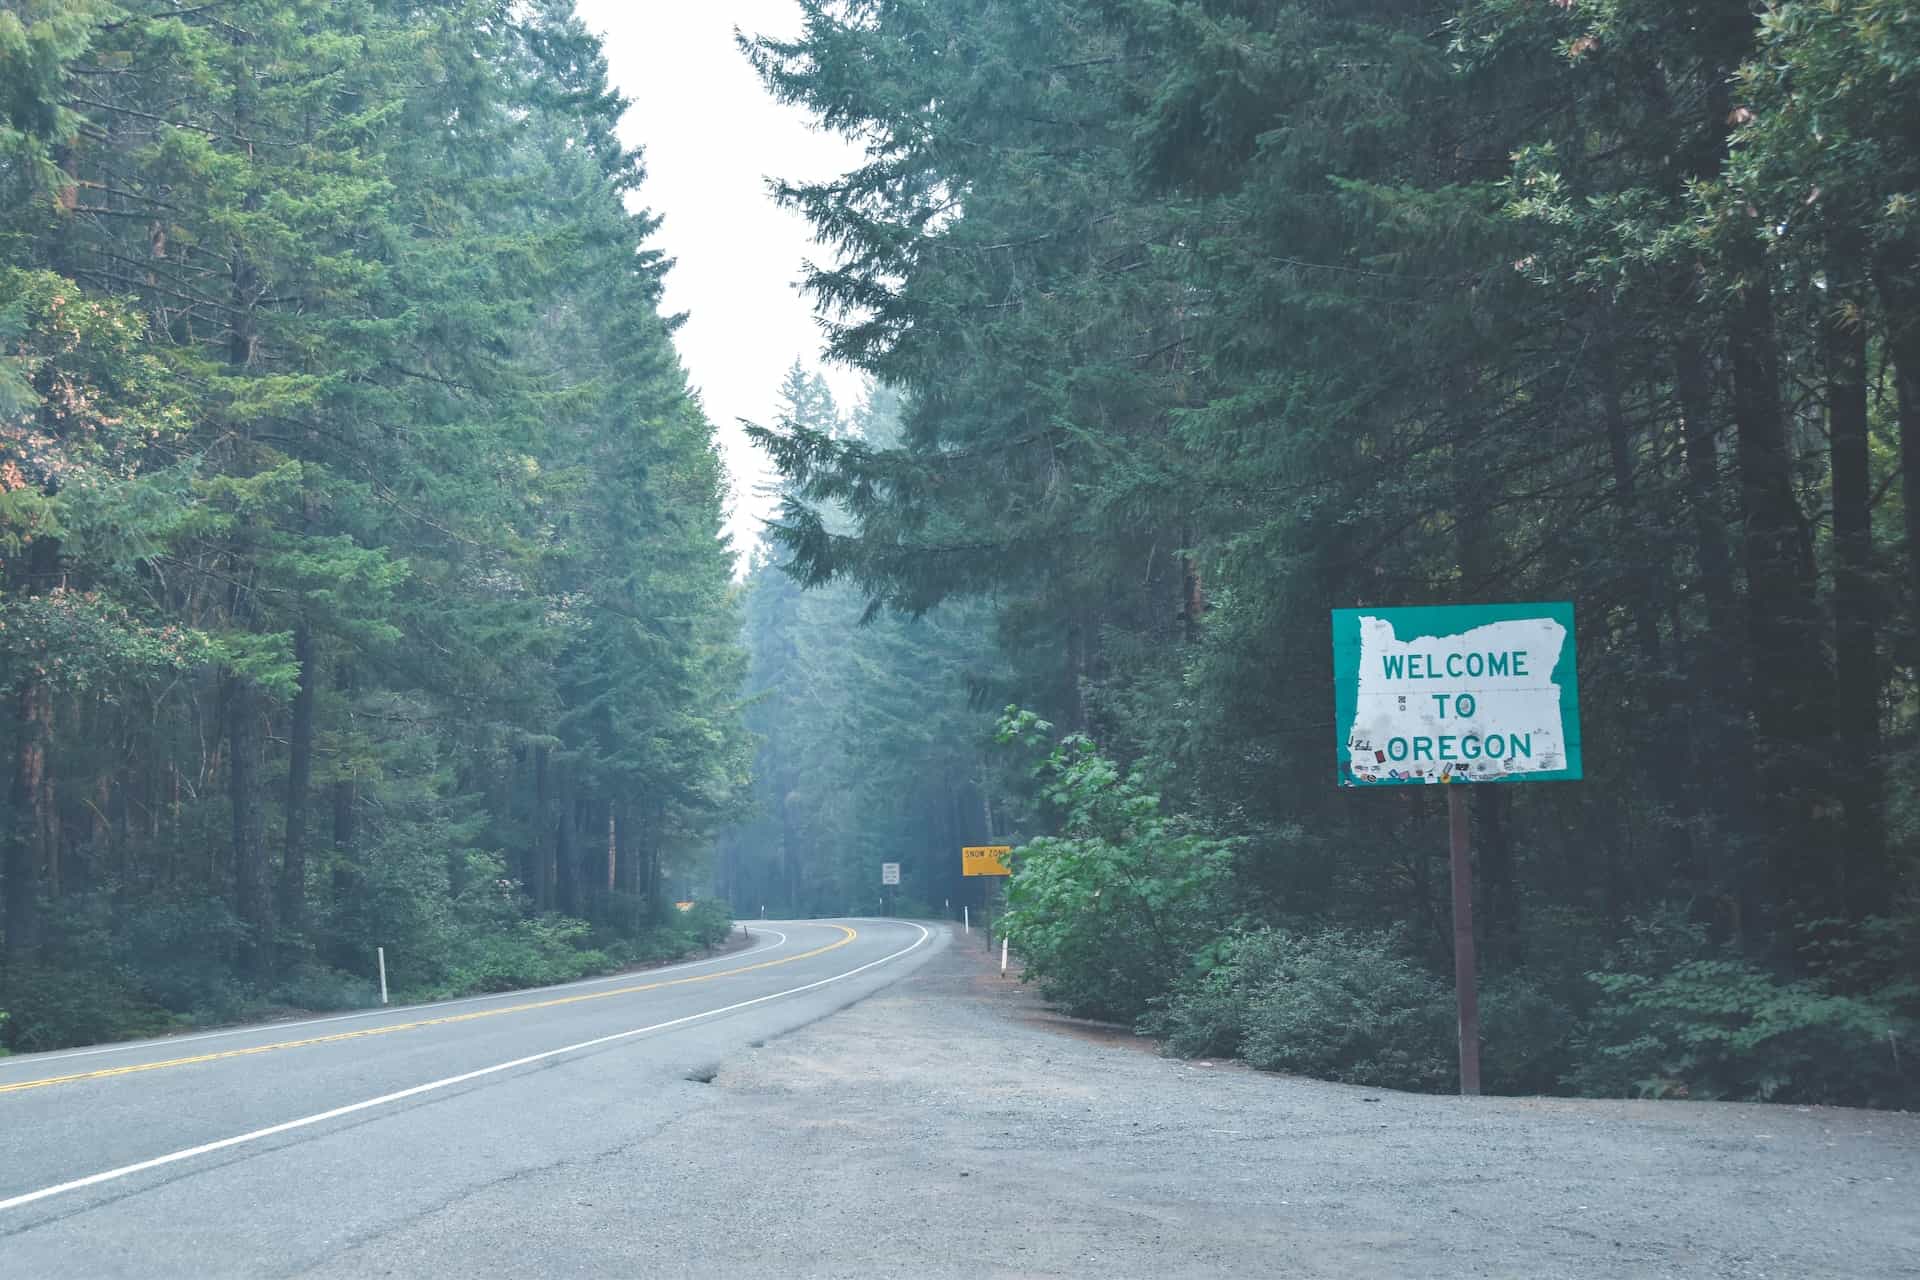 Welcome to Oregon signage